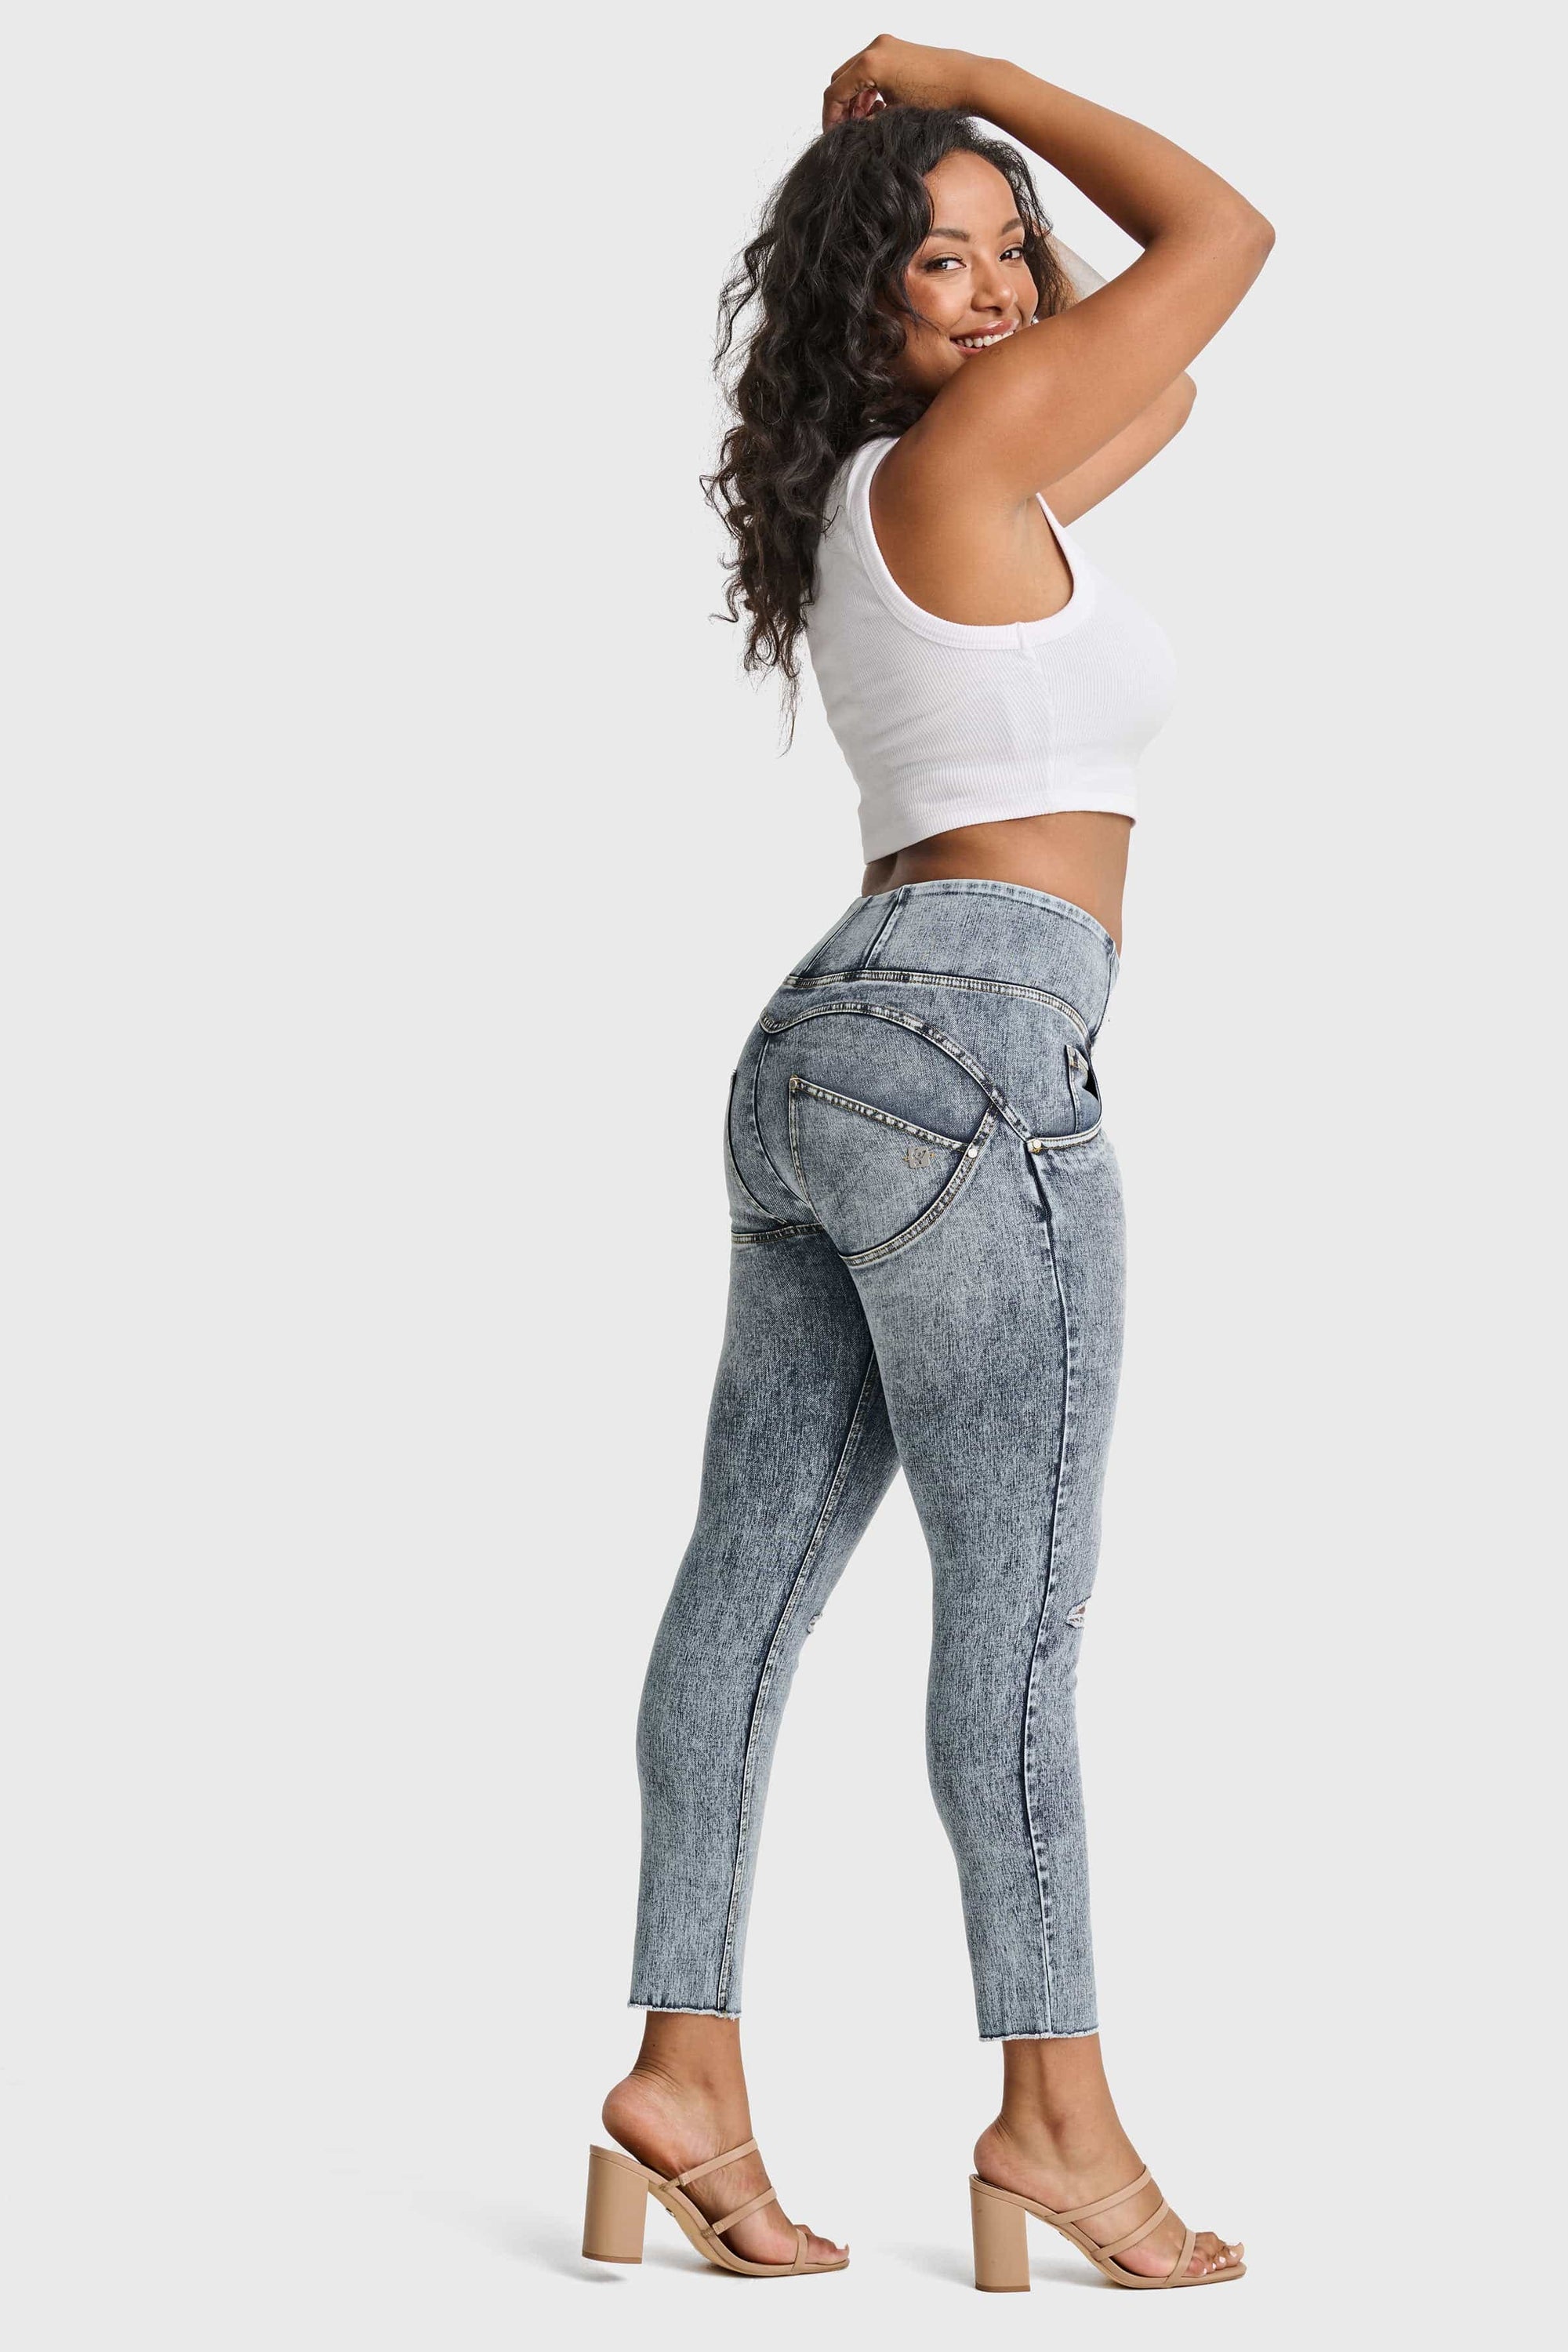 WR.UP® Snug Ripped Jeans - High Waisted - 7/8 Length - Blue Stonewash + Yellow Stitching 4